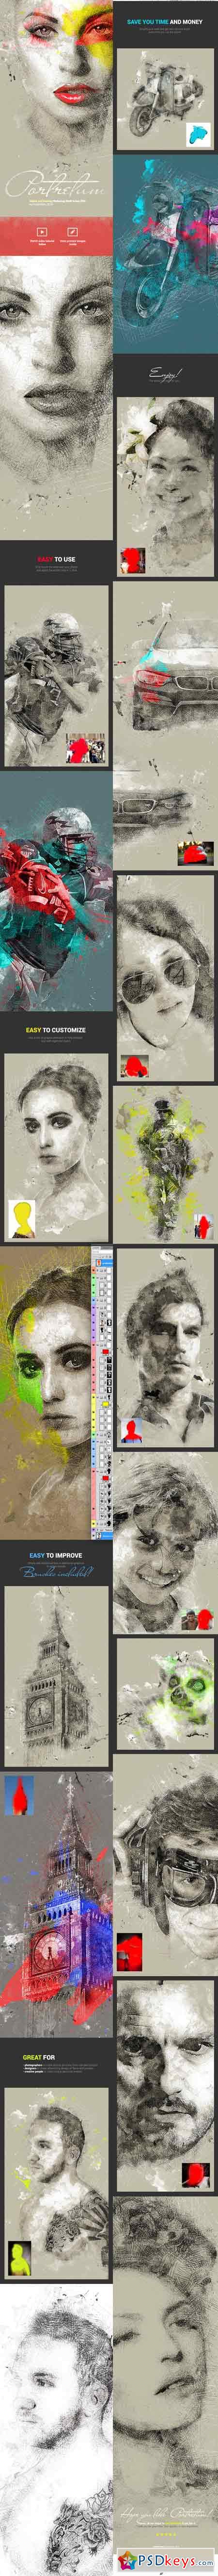 Portretum Sketch & Drawing PS Multi Action 14660425